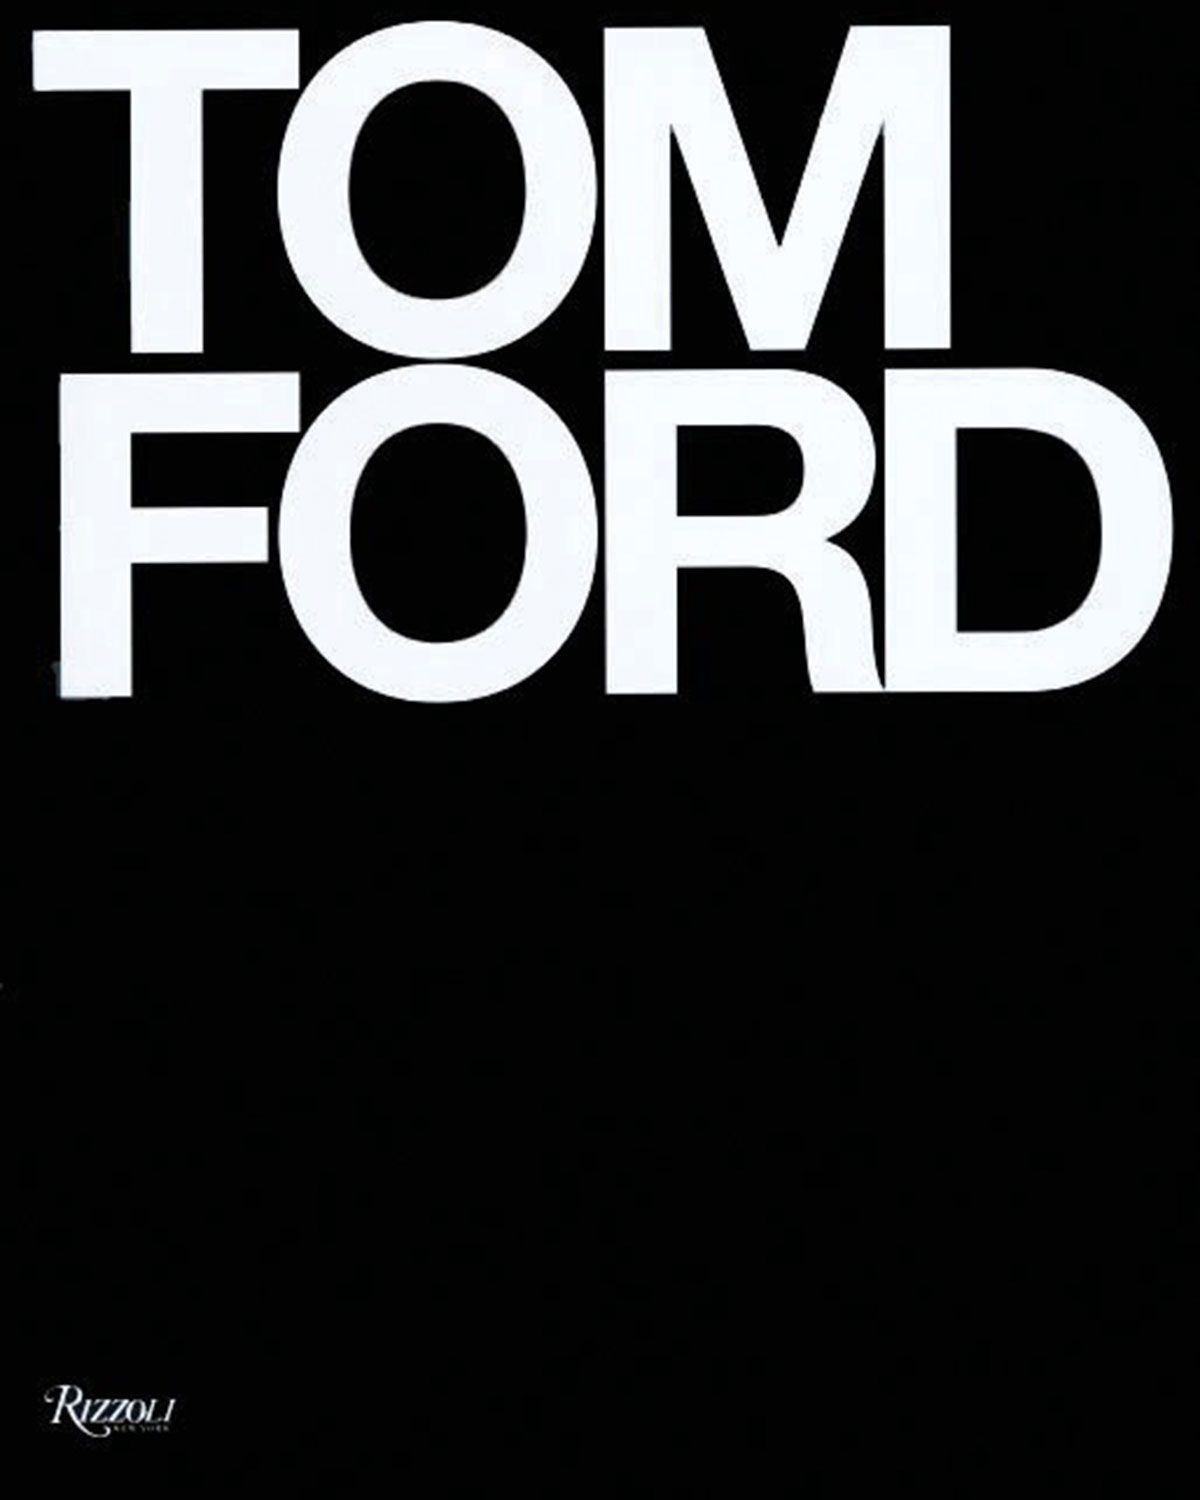 Tom Ford" Hardcover Book by Tom Ford & Bridget Foley | Horchow